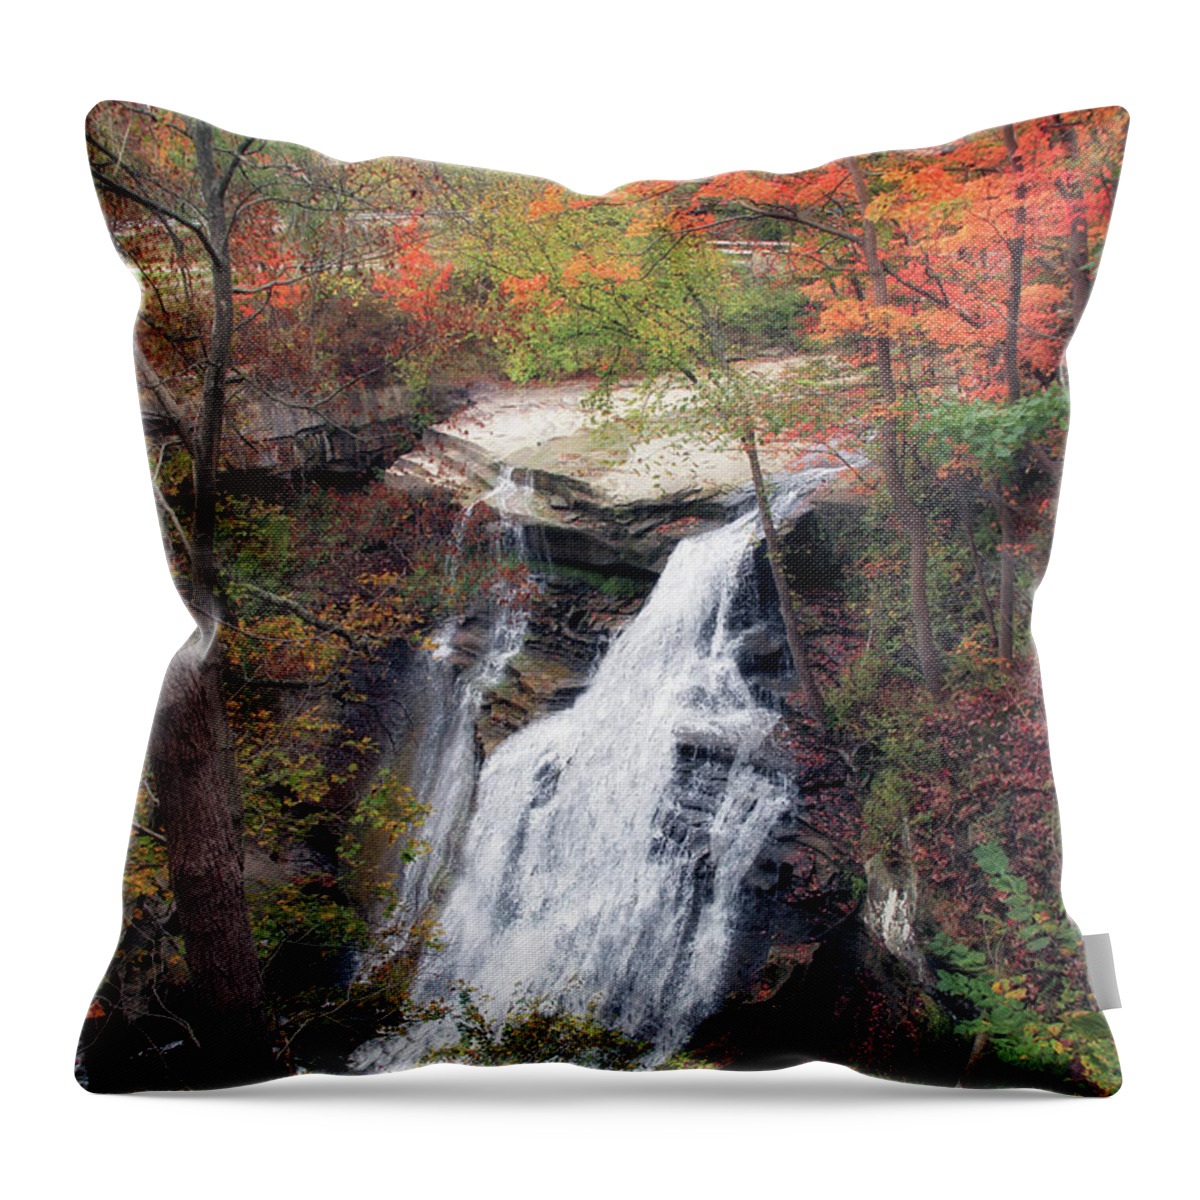 Brandywine Falls Throw Pillow featuring the photograph Brandywine Falls In Autumn by Linda Goodman